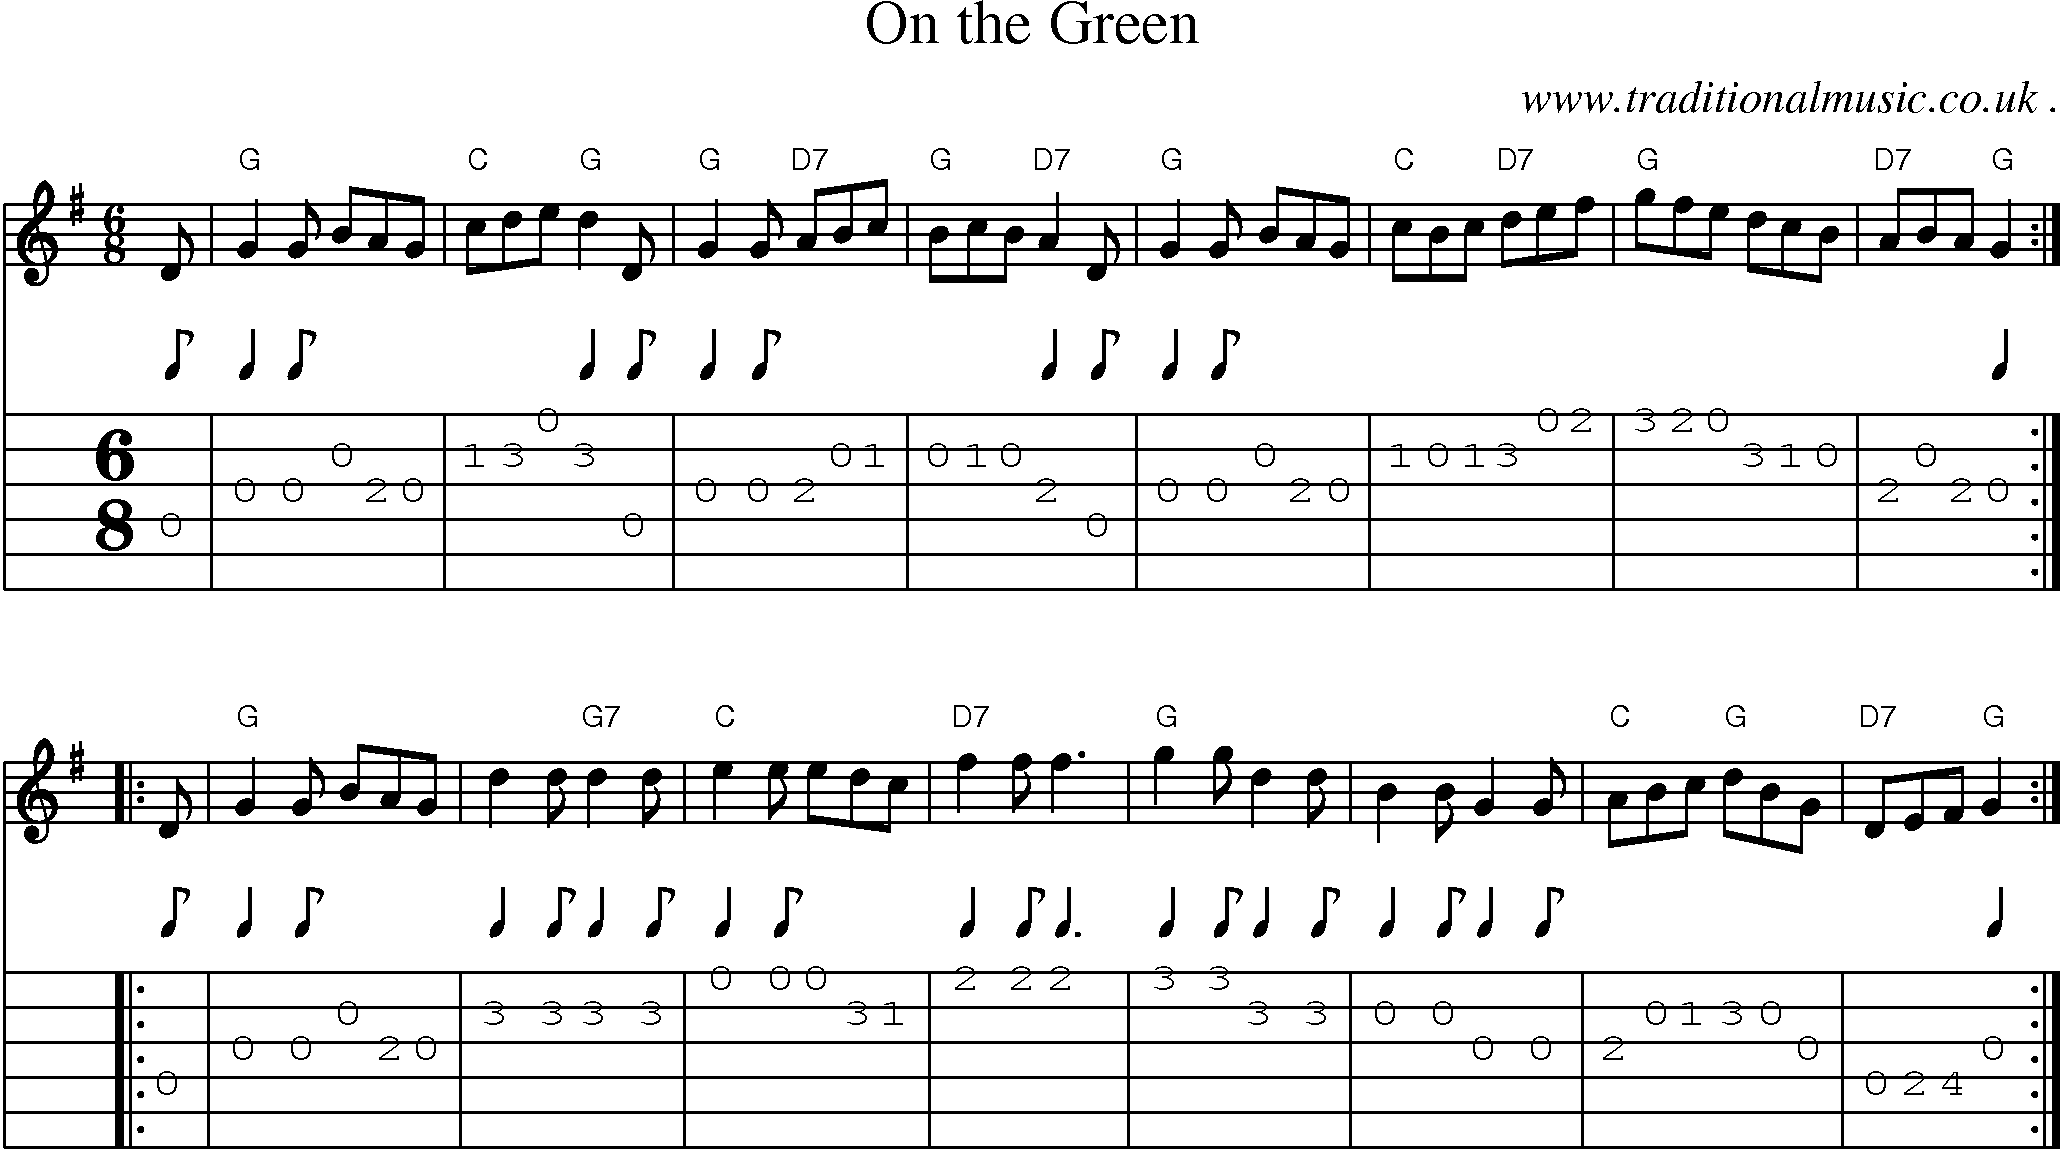 Sheet-music  score, Chords and Guitar Tabs for On The Green